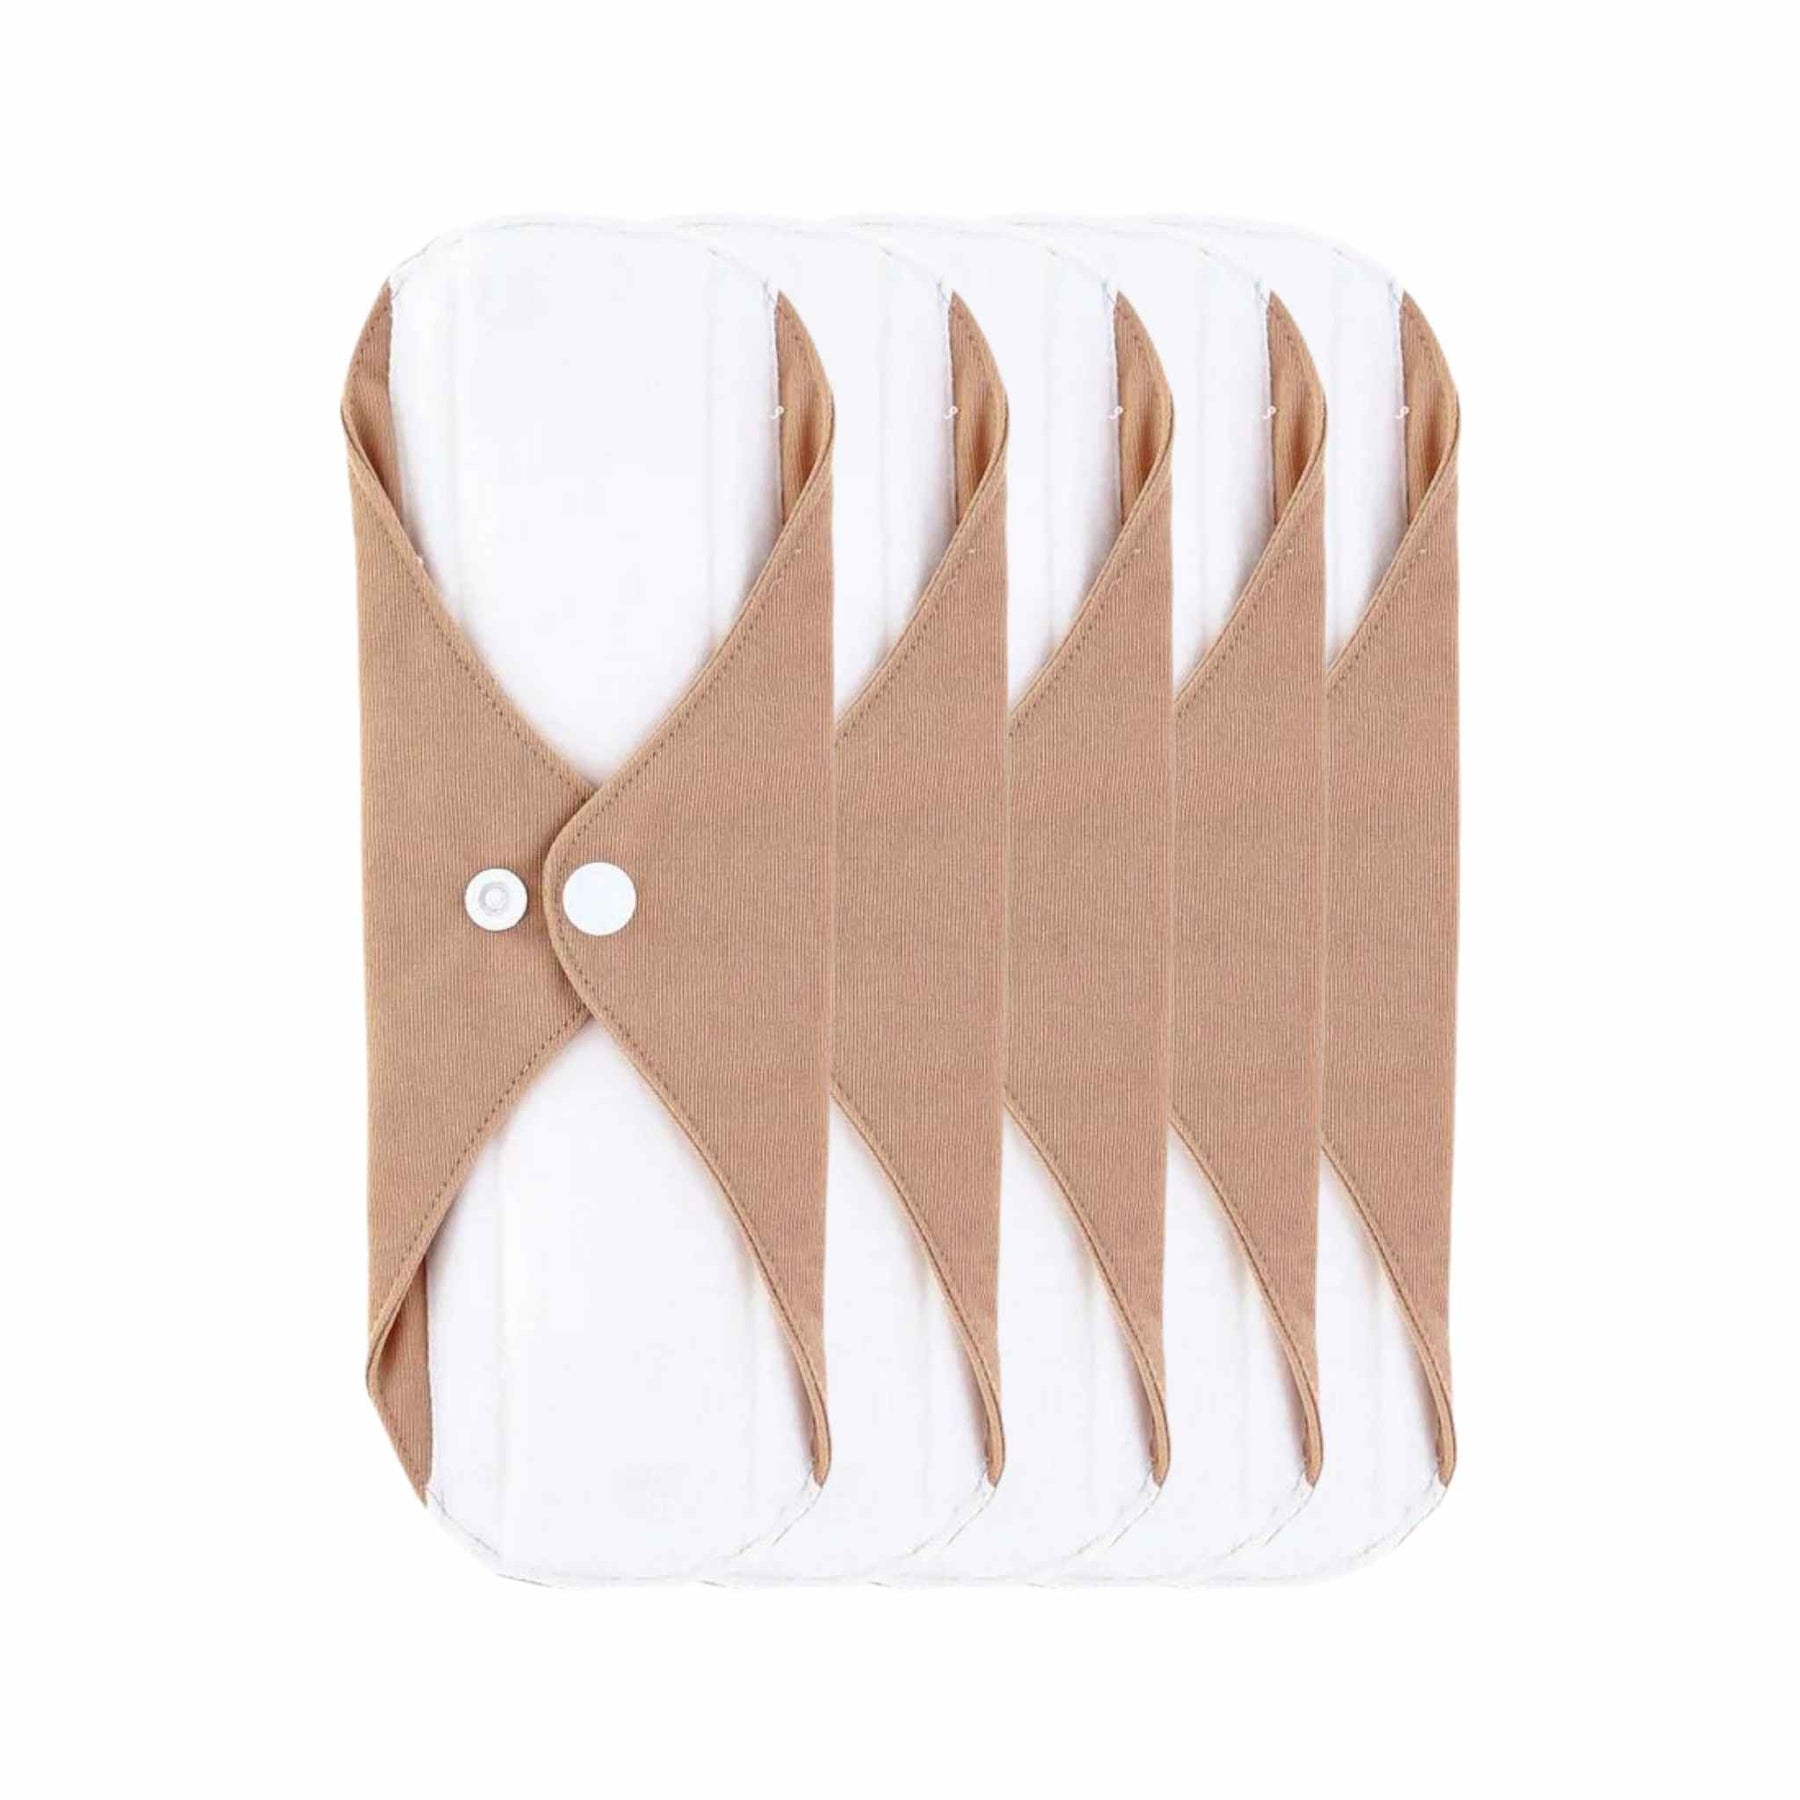 Little Lamb Cloth Sanitary Day Pad-Cloth Sanitary Pads-Little Lamb-Pack of 5-Tan-The Nappy Market